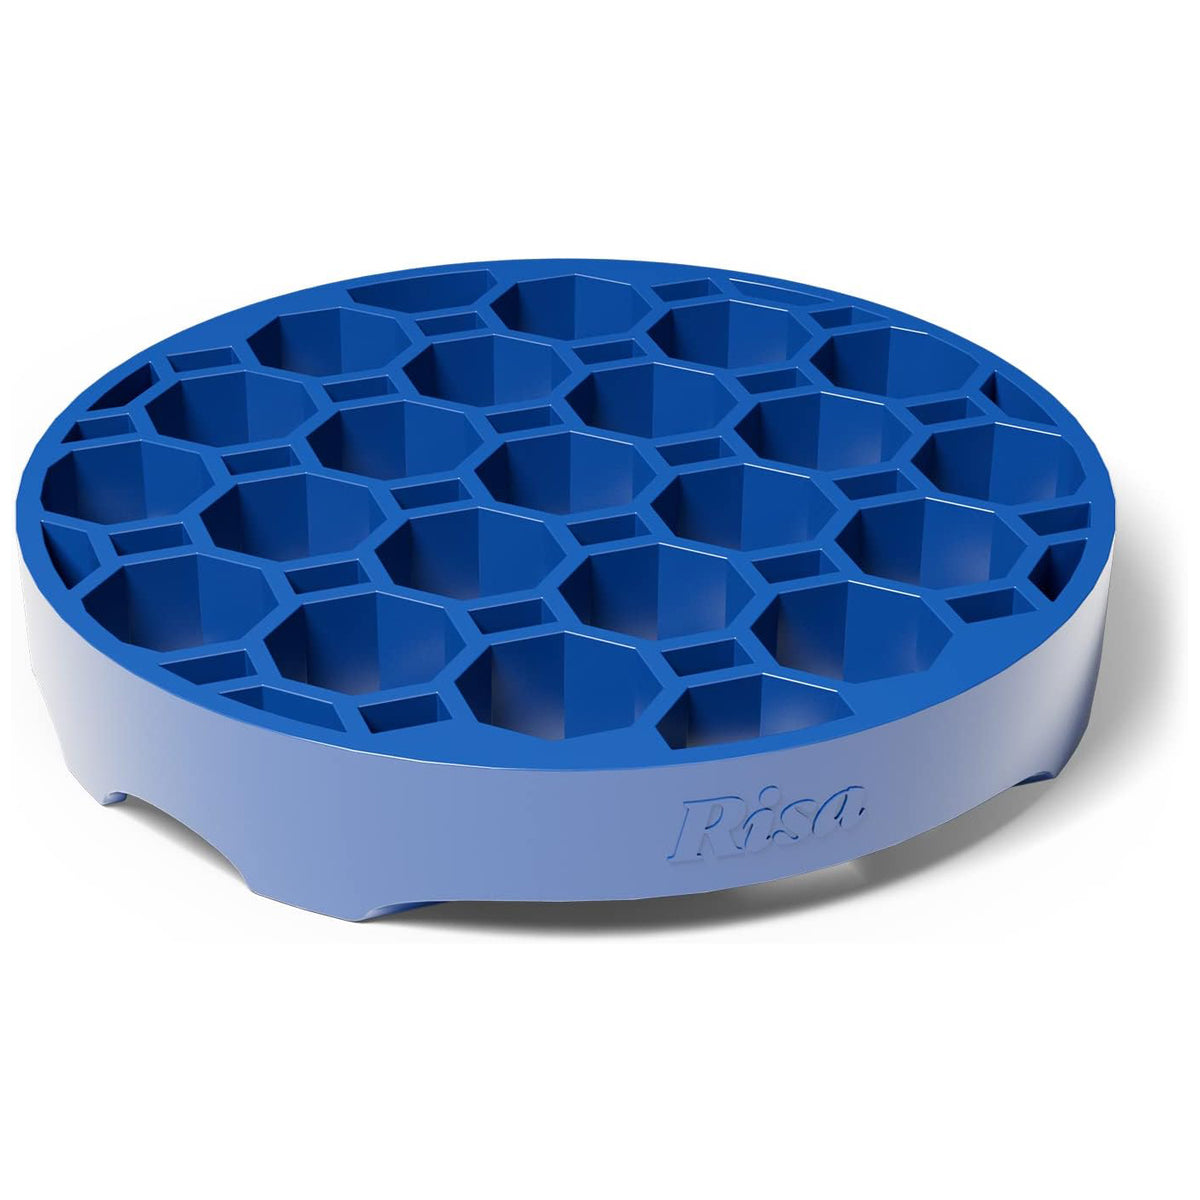 Roasting Rack And Trivet, Non-Stick Silicone, Deep Blue – Cook Evenly, Less Fat